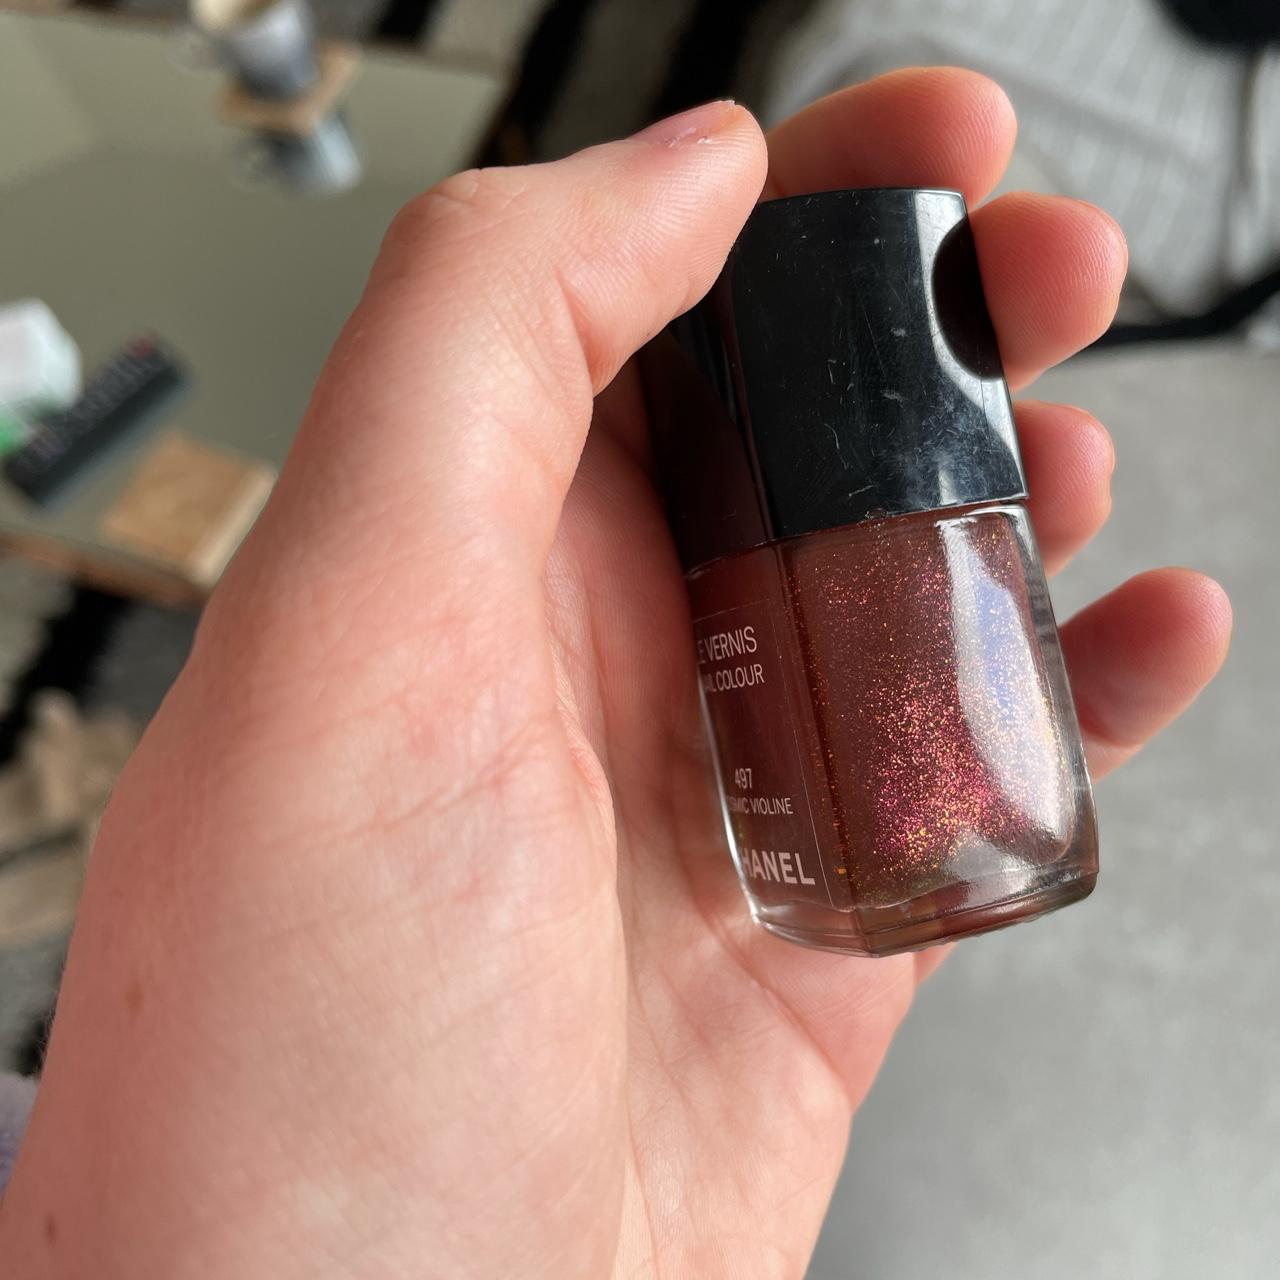 Chanel nail colour in shade 497 Cosmic Violine , Less